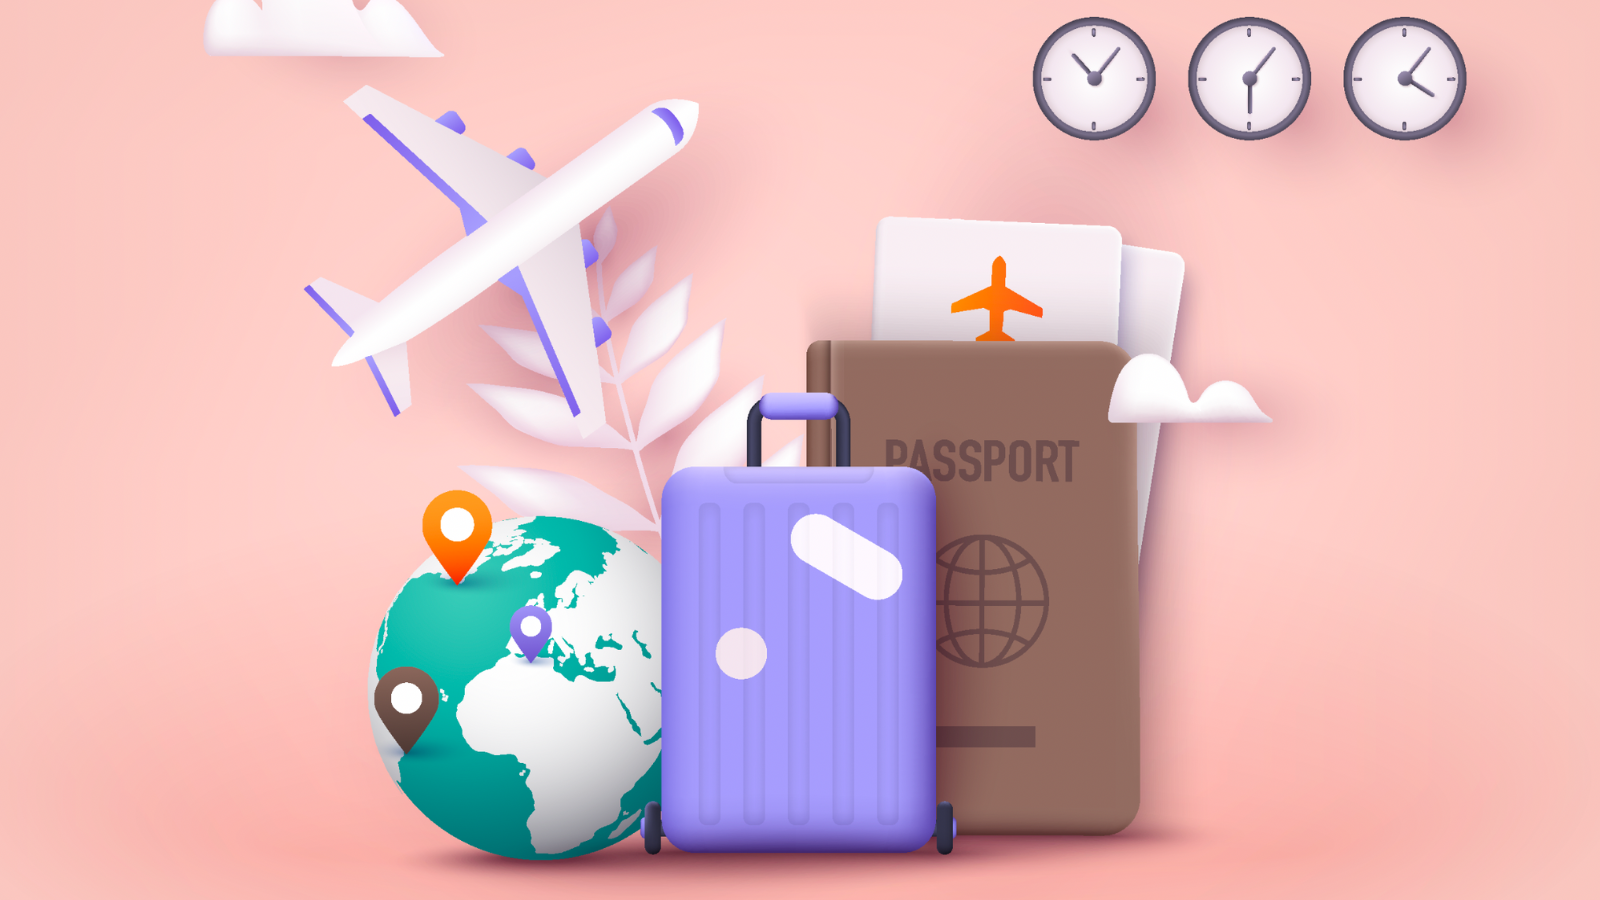 Animated airplane, suitcase and passport against plain background